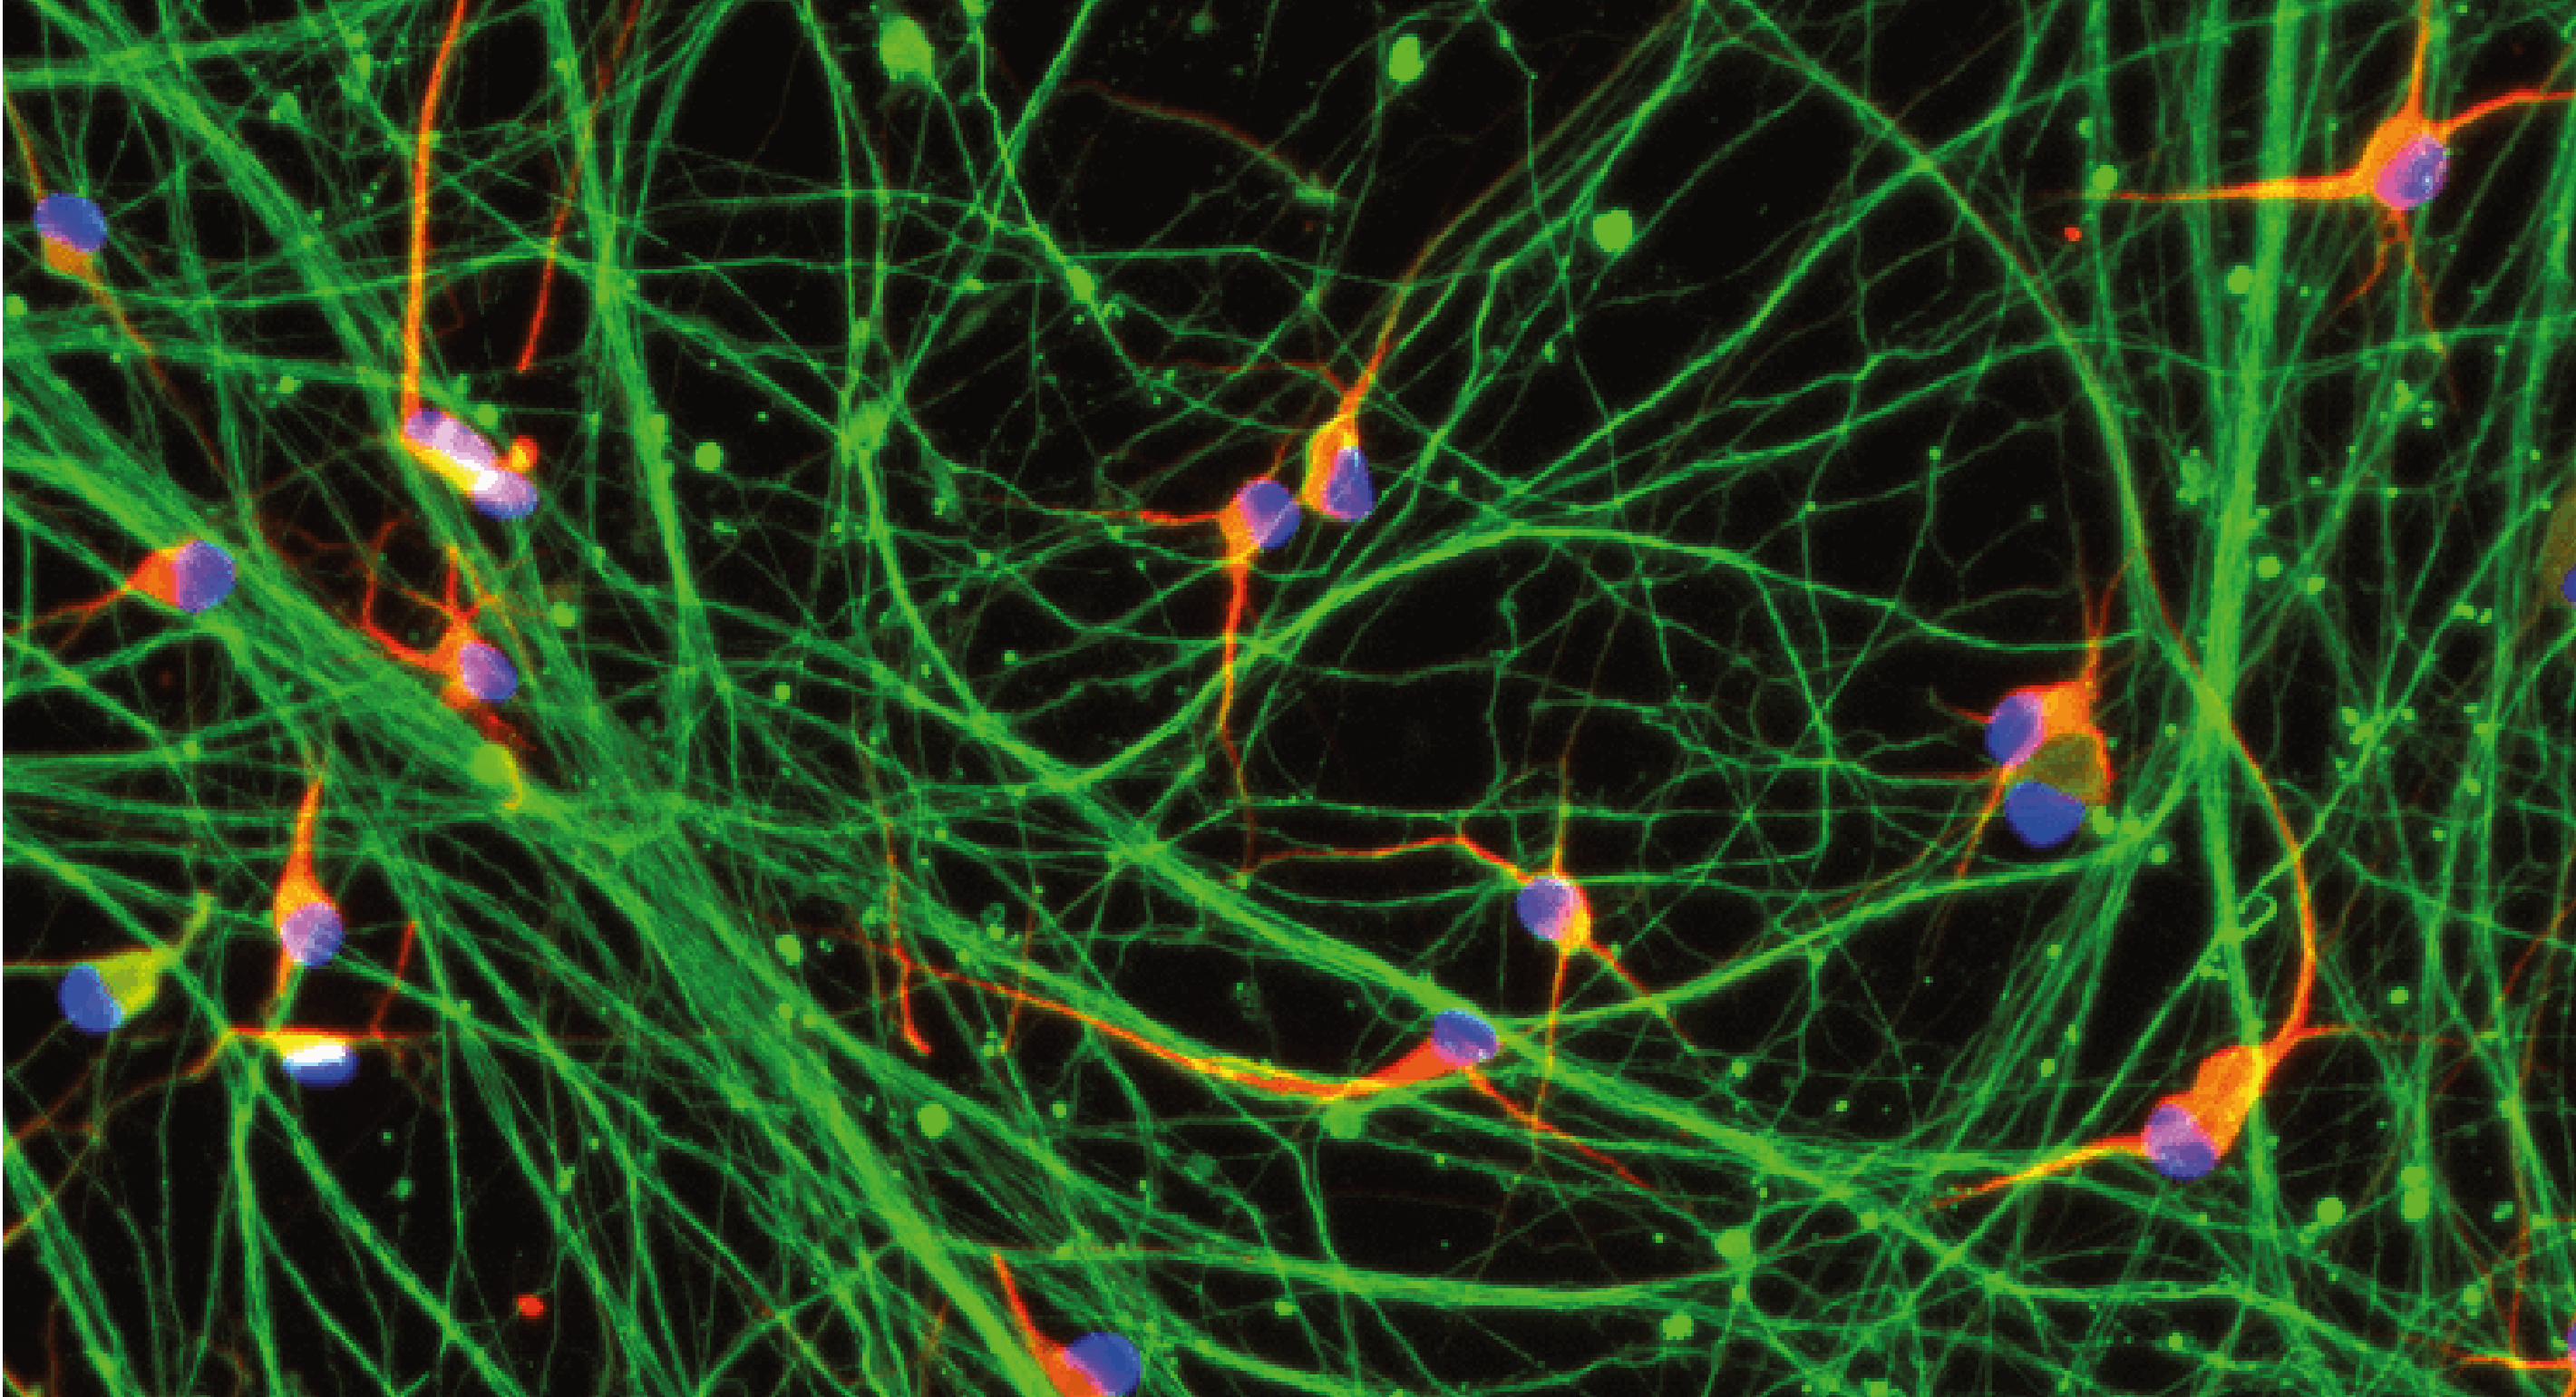 An ICC image depicting iPSC-derived glutamatergic neurons containing a disease inducing mutation